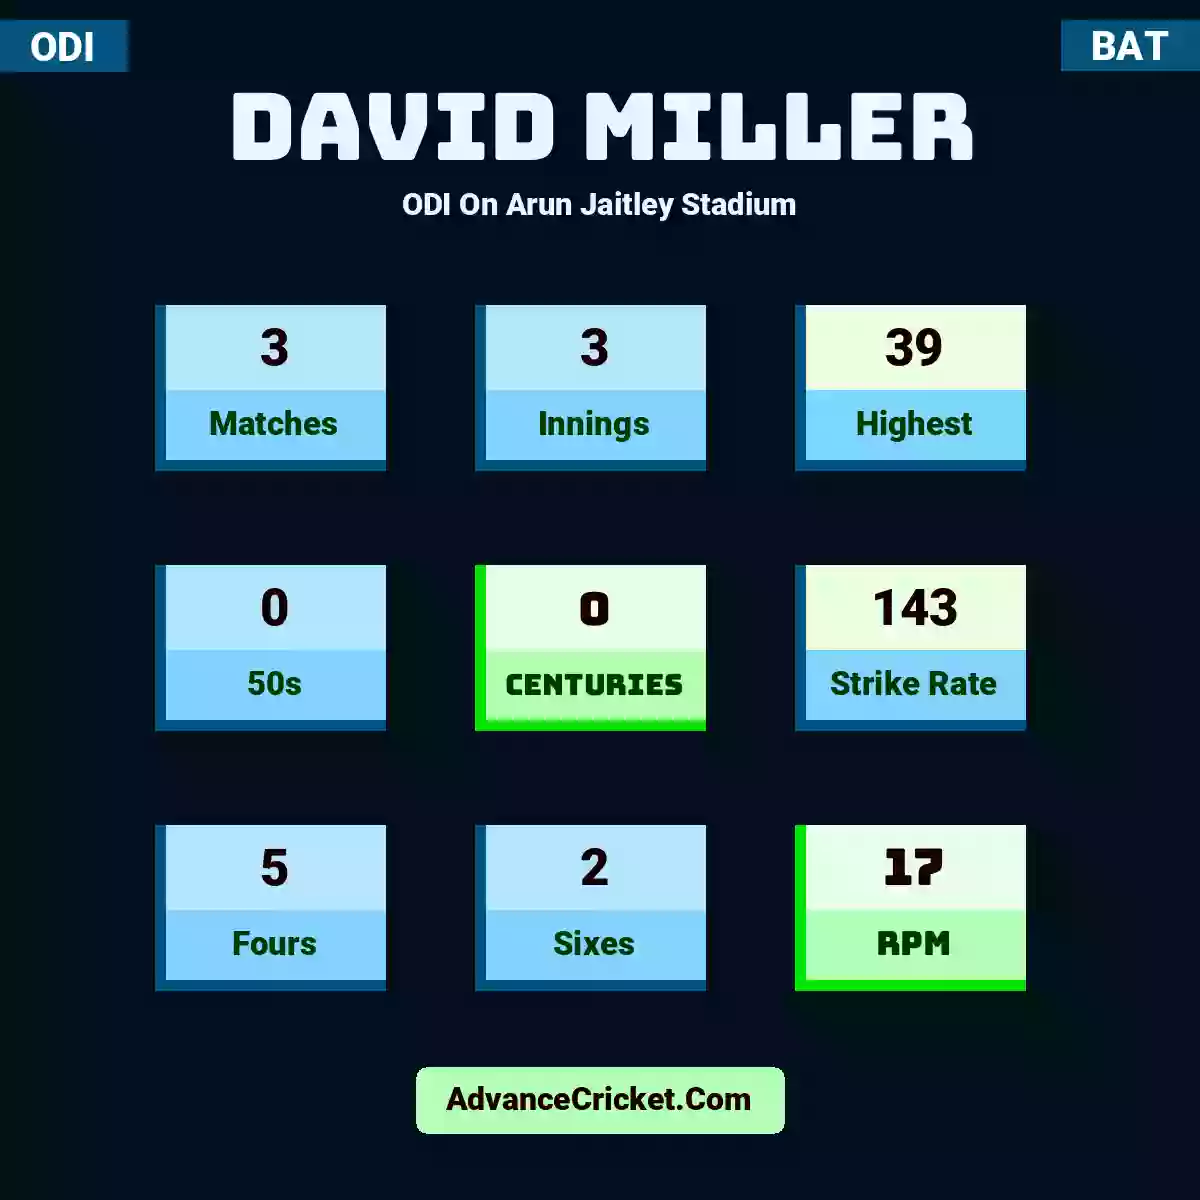 David Miller ODI  On Arun Jaitley Stadium, David Miller played 3 matches, scored 39 runs as highest, 0 half-centuries, and 0 centuries, with a strike rate of 143. D.Miller hit 5 fours and 2 sixes, with an RPM of 17.